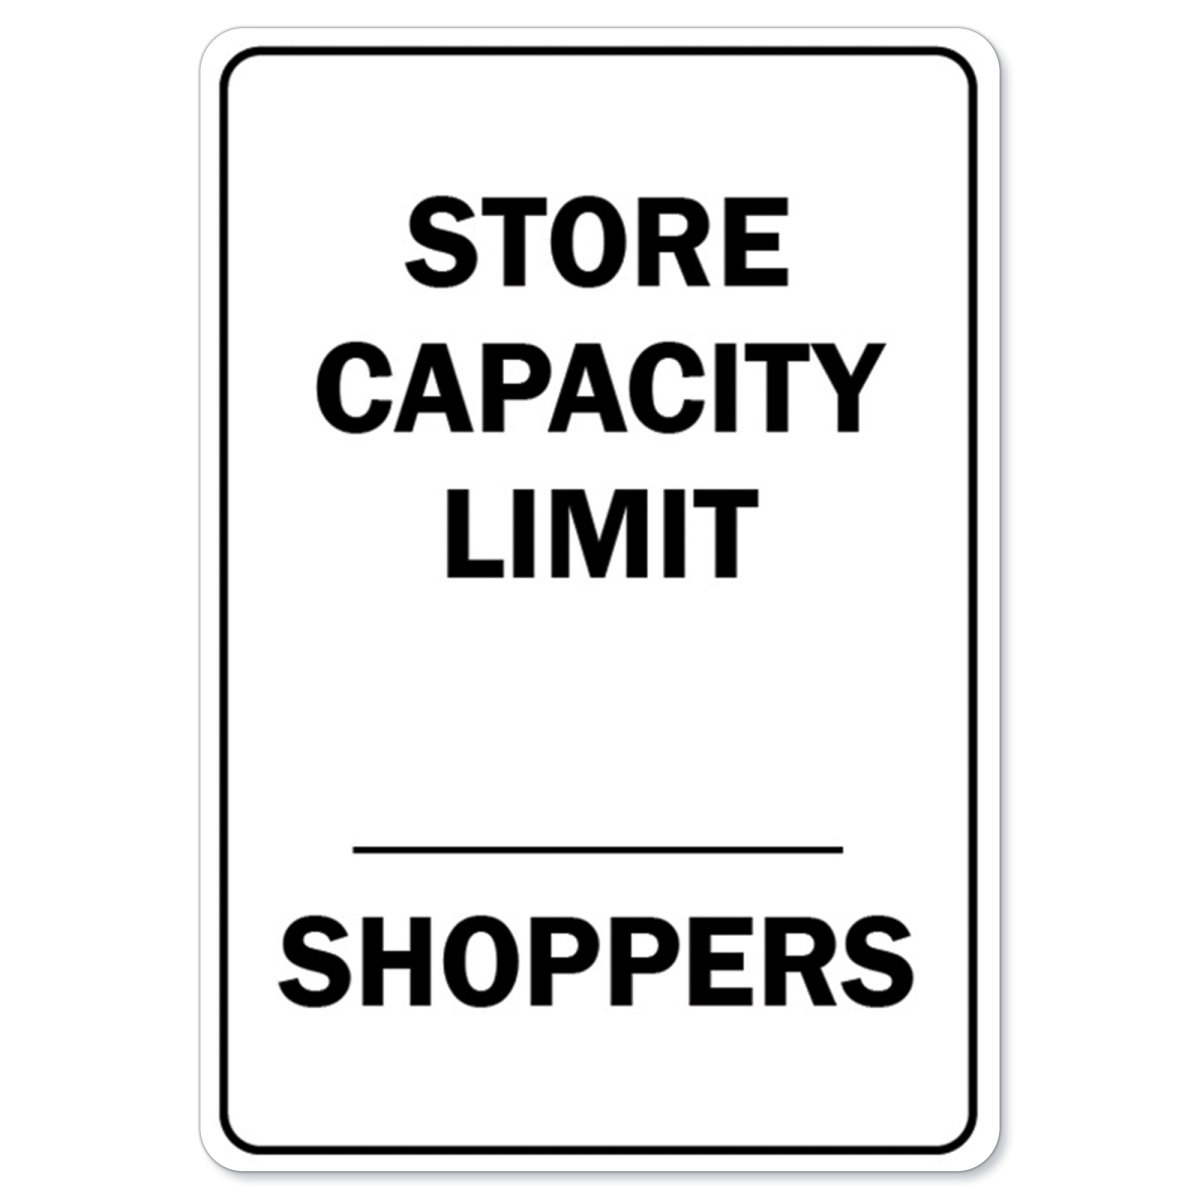 Amistad Covid-19 Notice Sign - Store Capacity Limit Shoppers